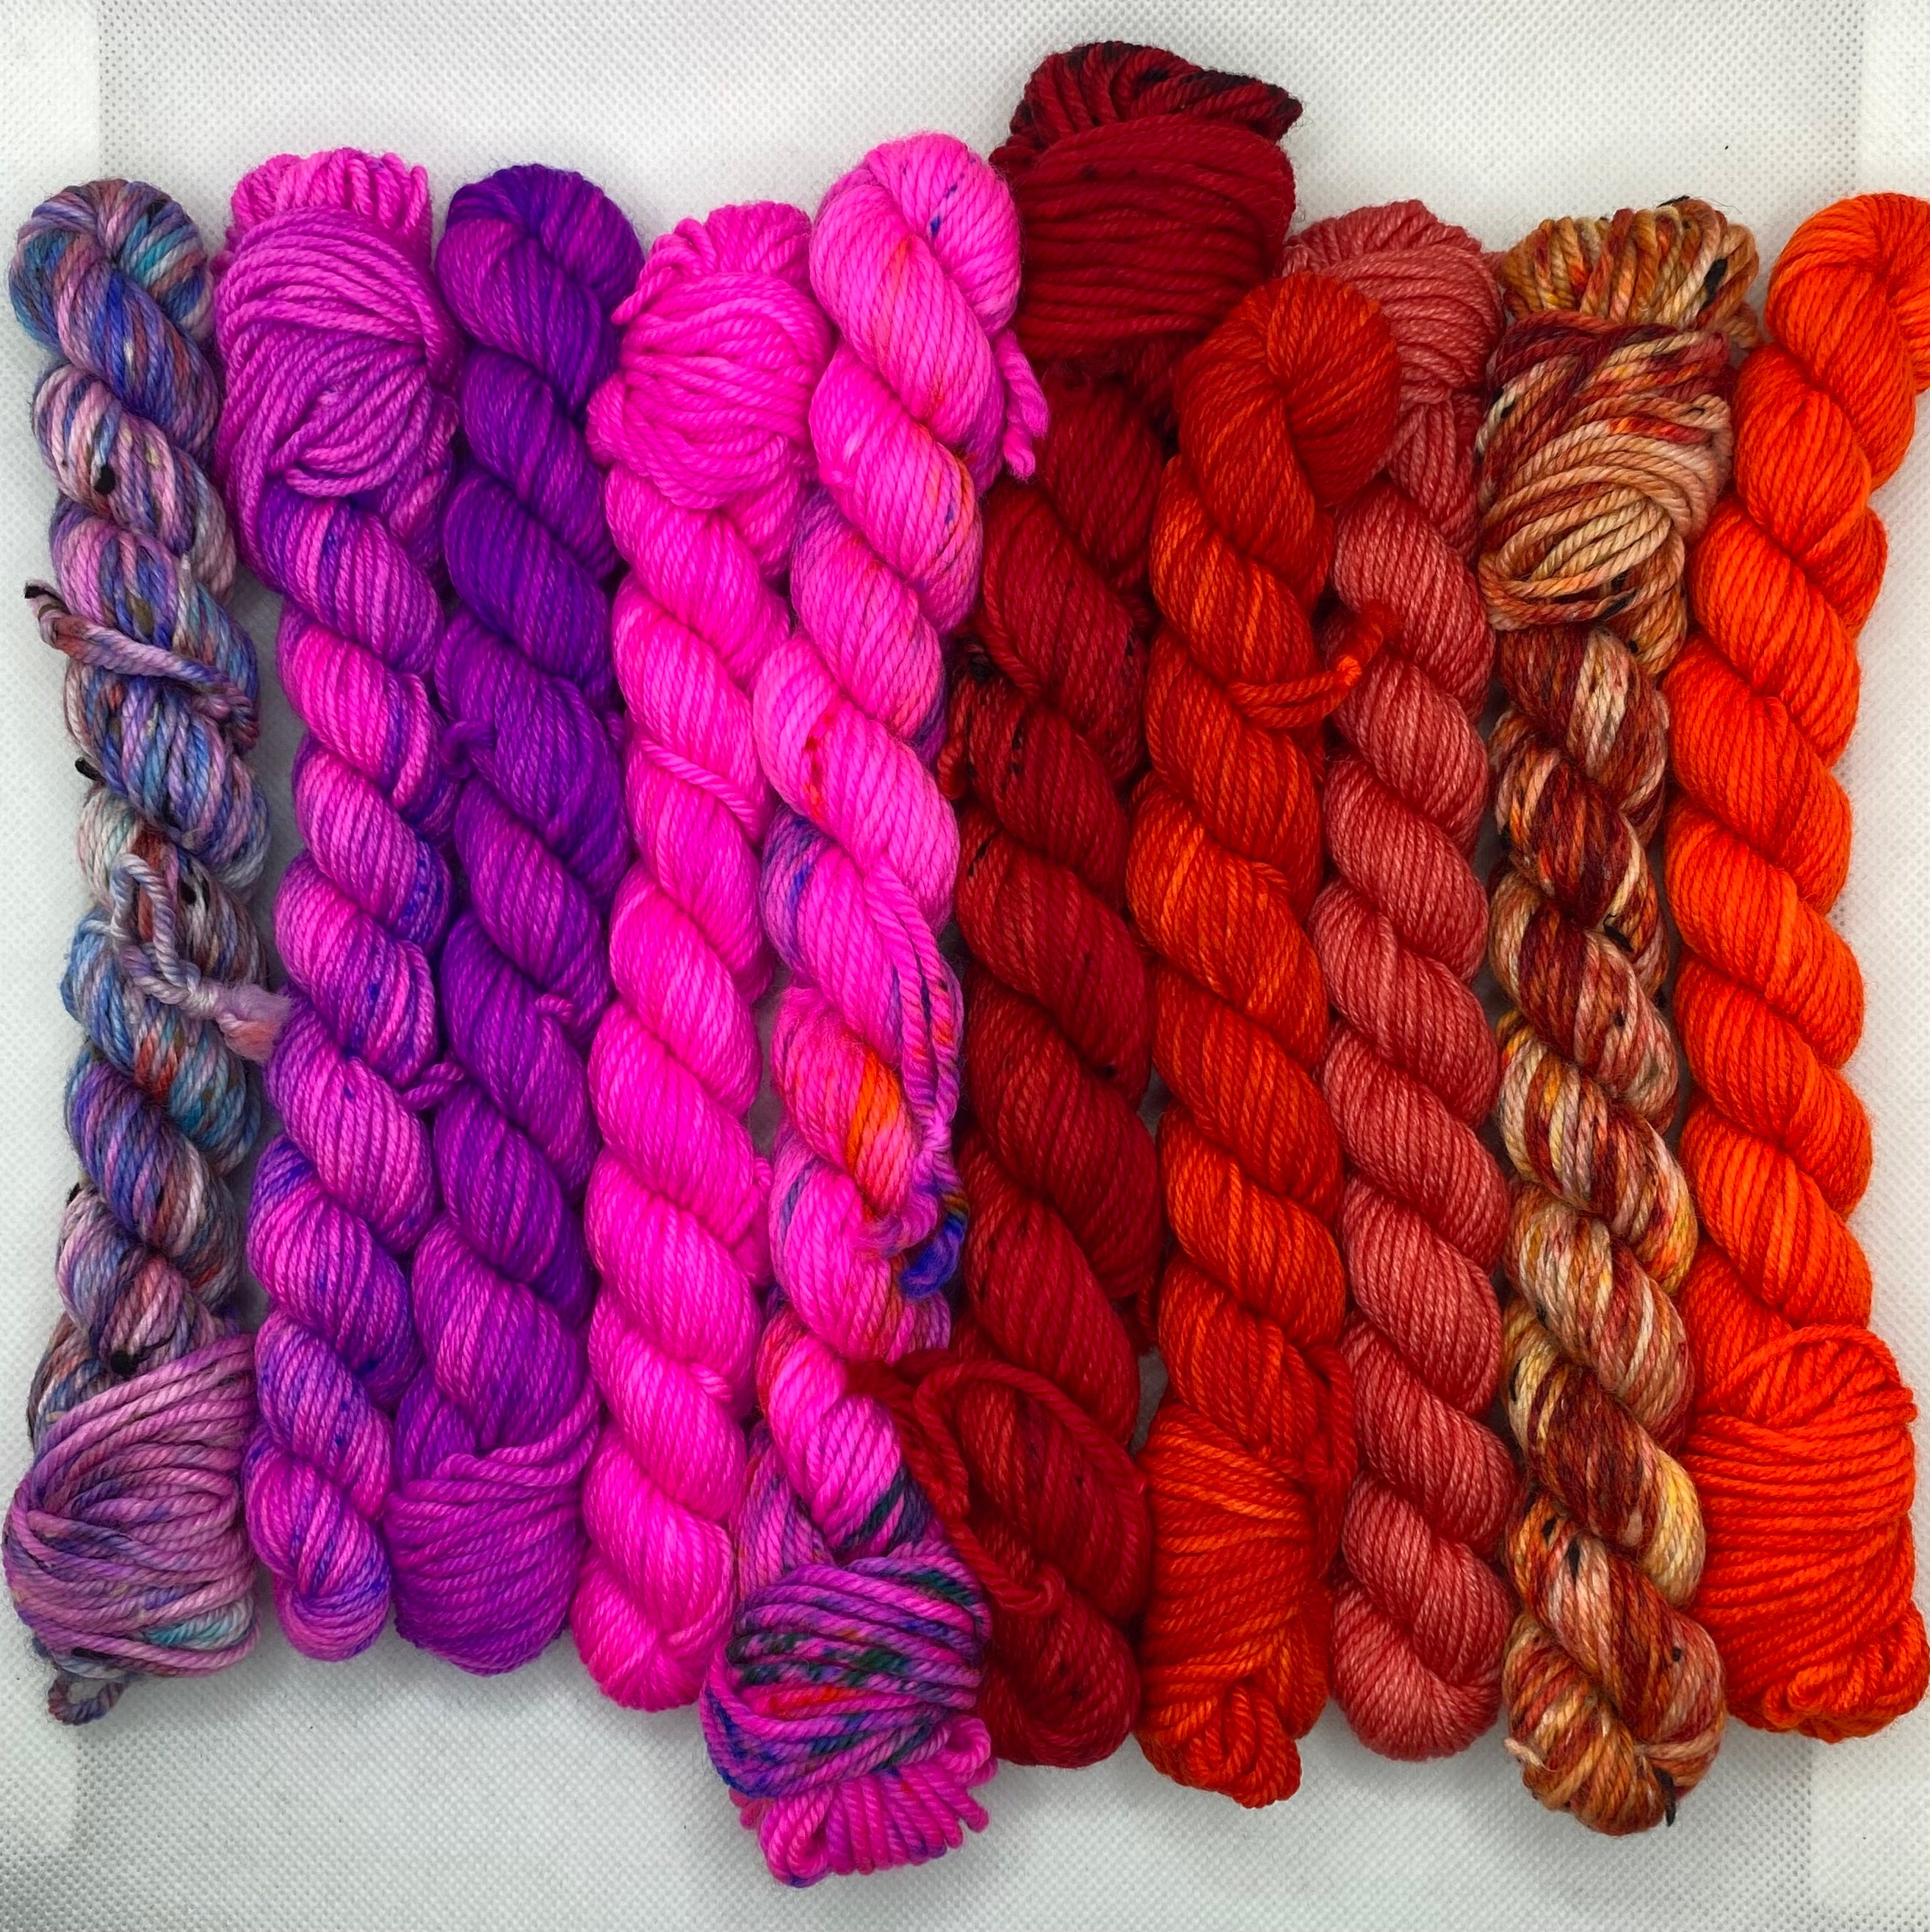 “Oranges, Pinks and Purples” DK Mini Skein Set of Hand Dyed Yarn